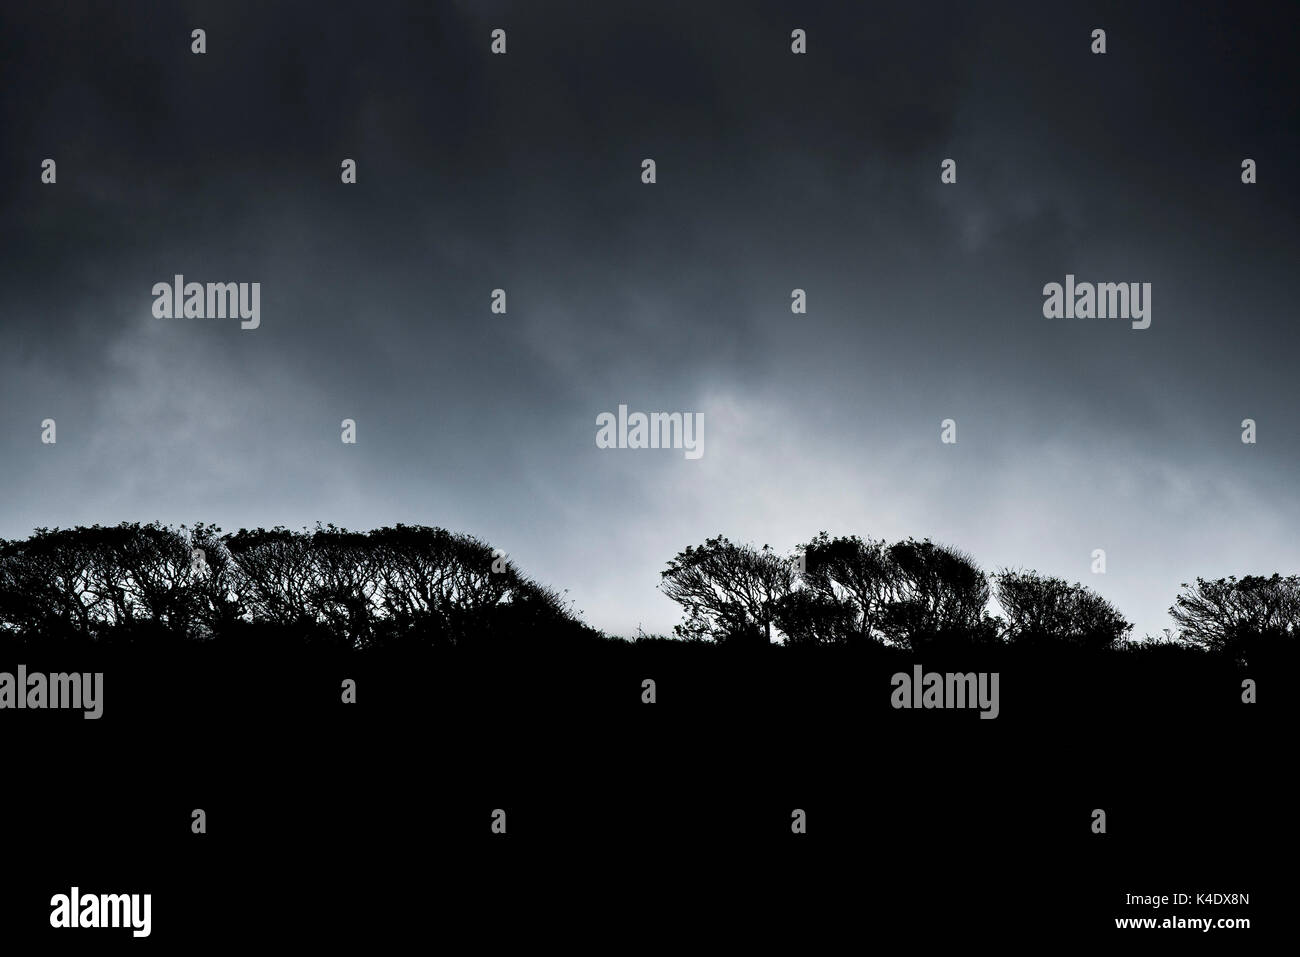 A hedgerow silhouetted against a stormy sky Stock Photo